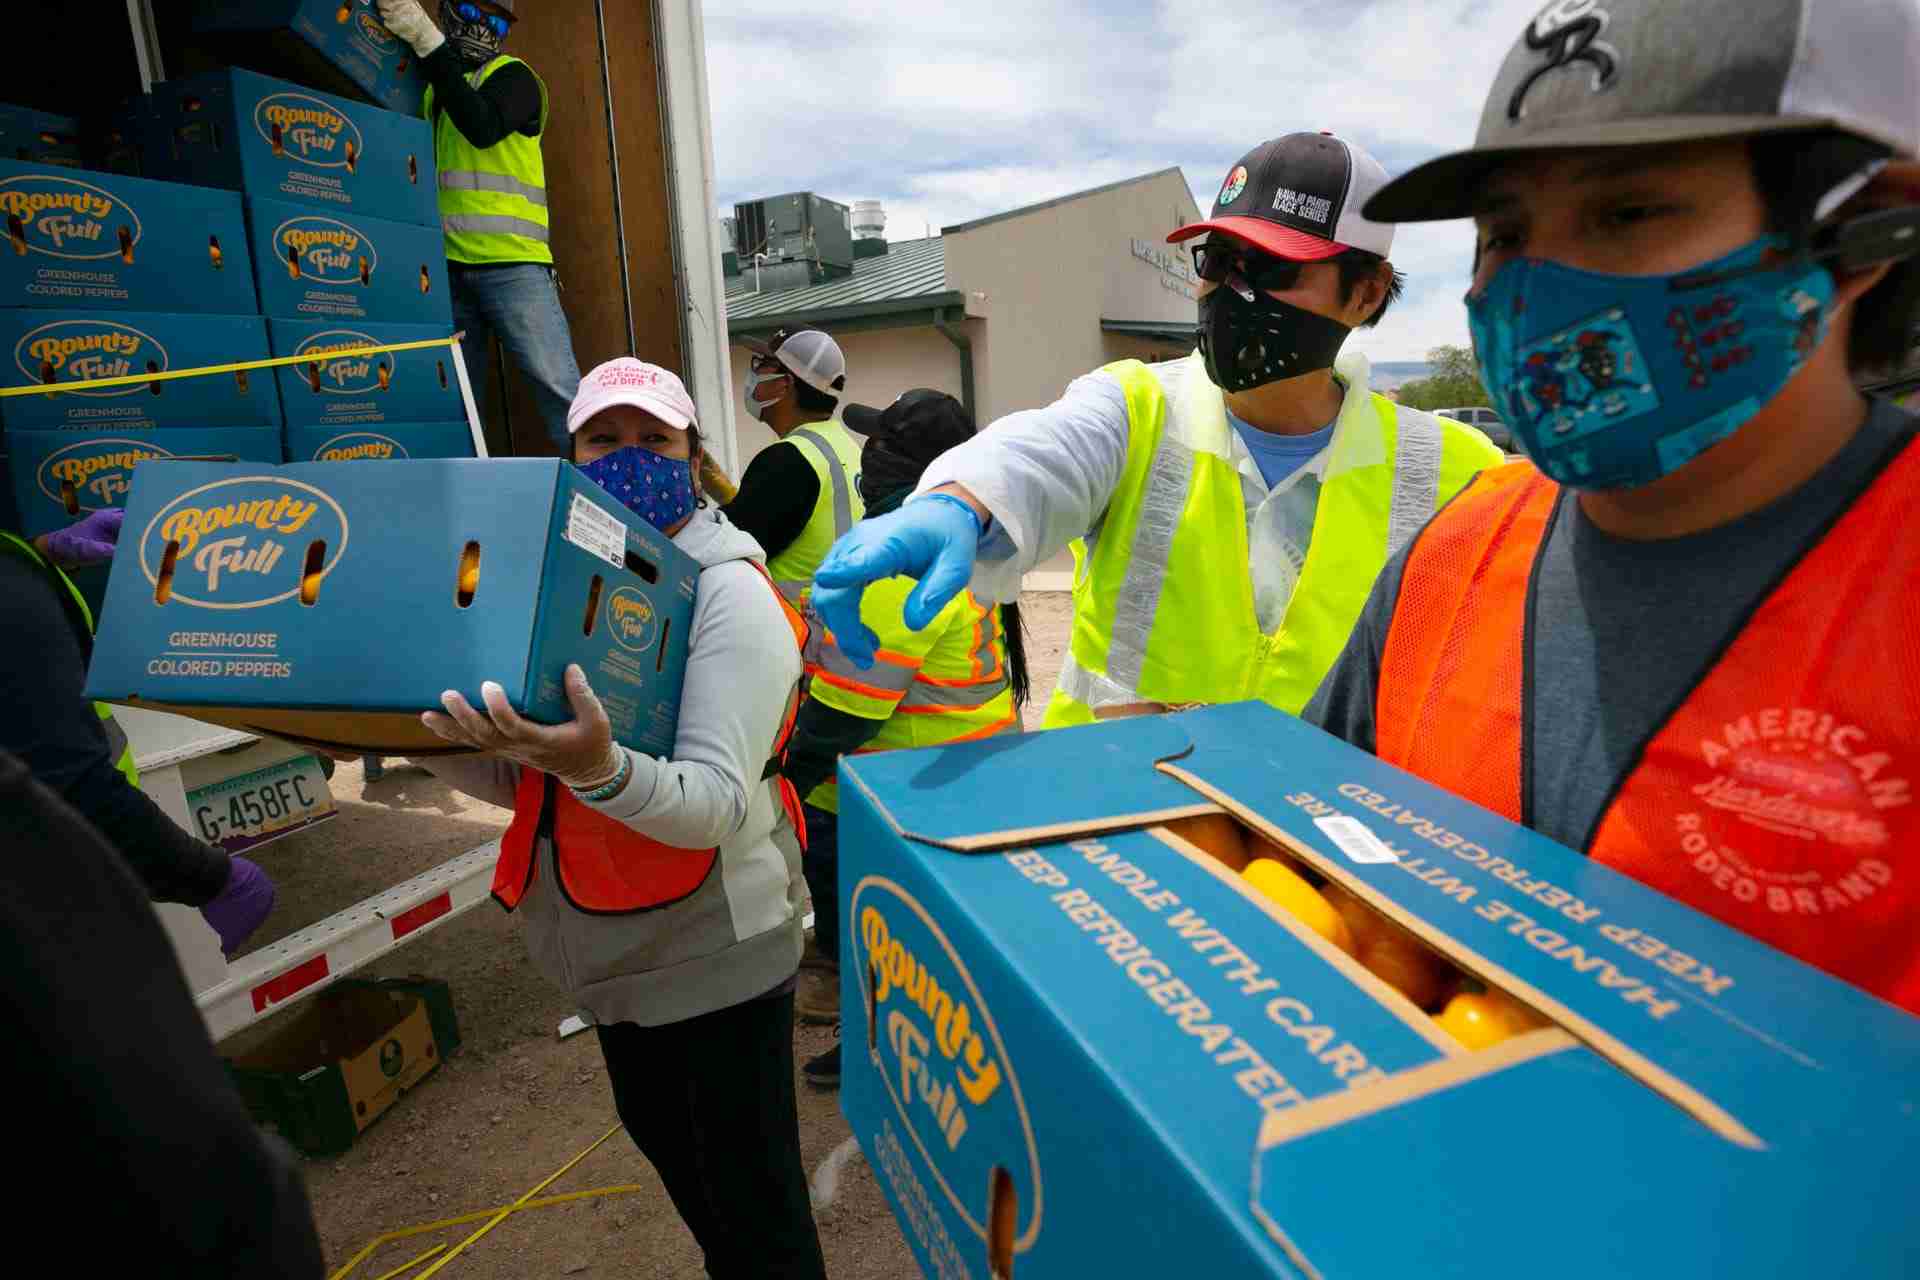 Navajo Nation President Jonathan Nez, center, and Isaiah Tsosie, right, an office specialist with the Coyote Canyon chapter, move fresh food off a truck to be distributed to community members at a food distribution point before the start of a weekend long curfew, in Coyote Canyon, N.M., on the Navajo Nation on May 15, 2020. All businesses including the 13 grocery stores on the reservation were closed during the weekend long curfew to combat the new coronavirus pandemic. The Navajo Nation has been one of the hardest hit areas from the COVID-19 pandemic in the entire United States.